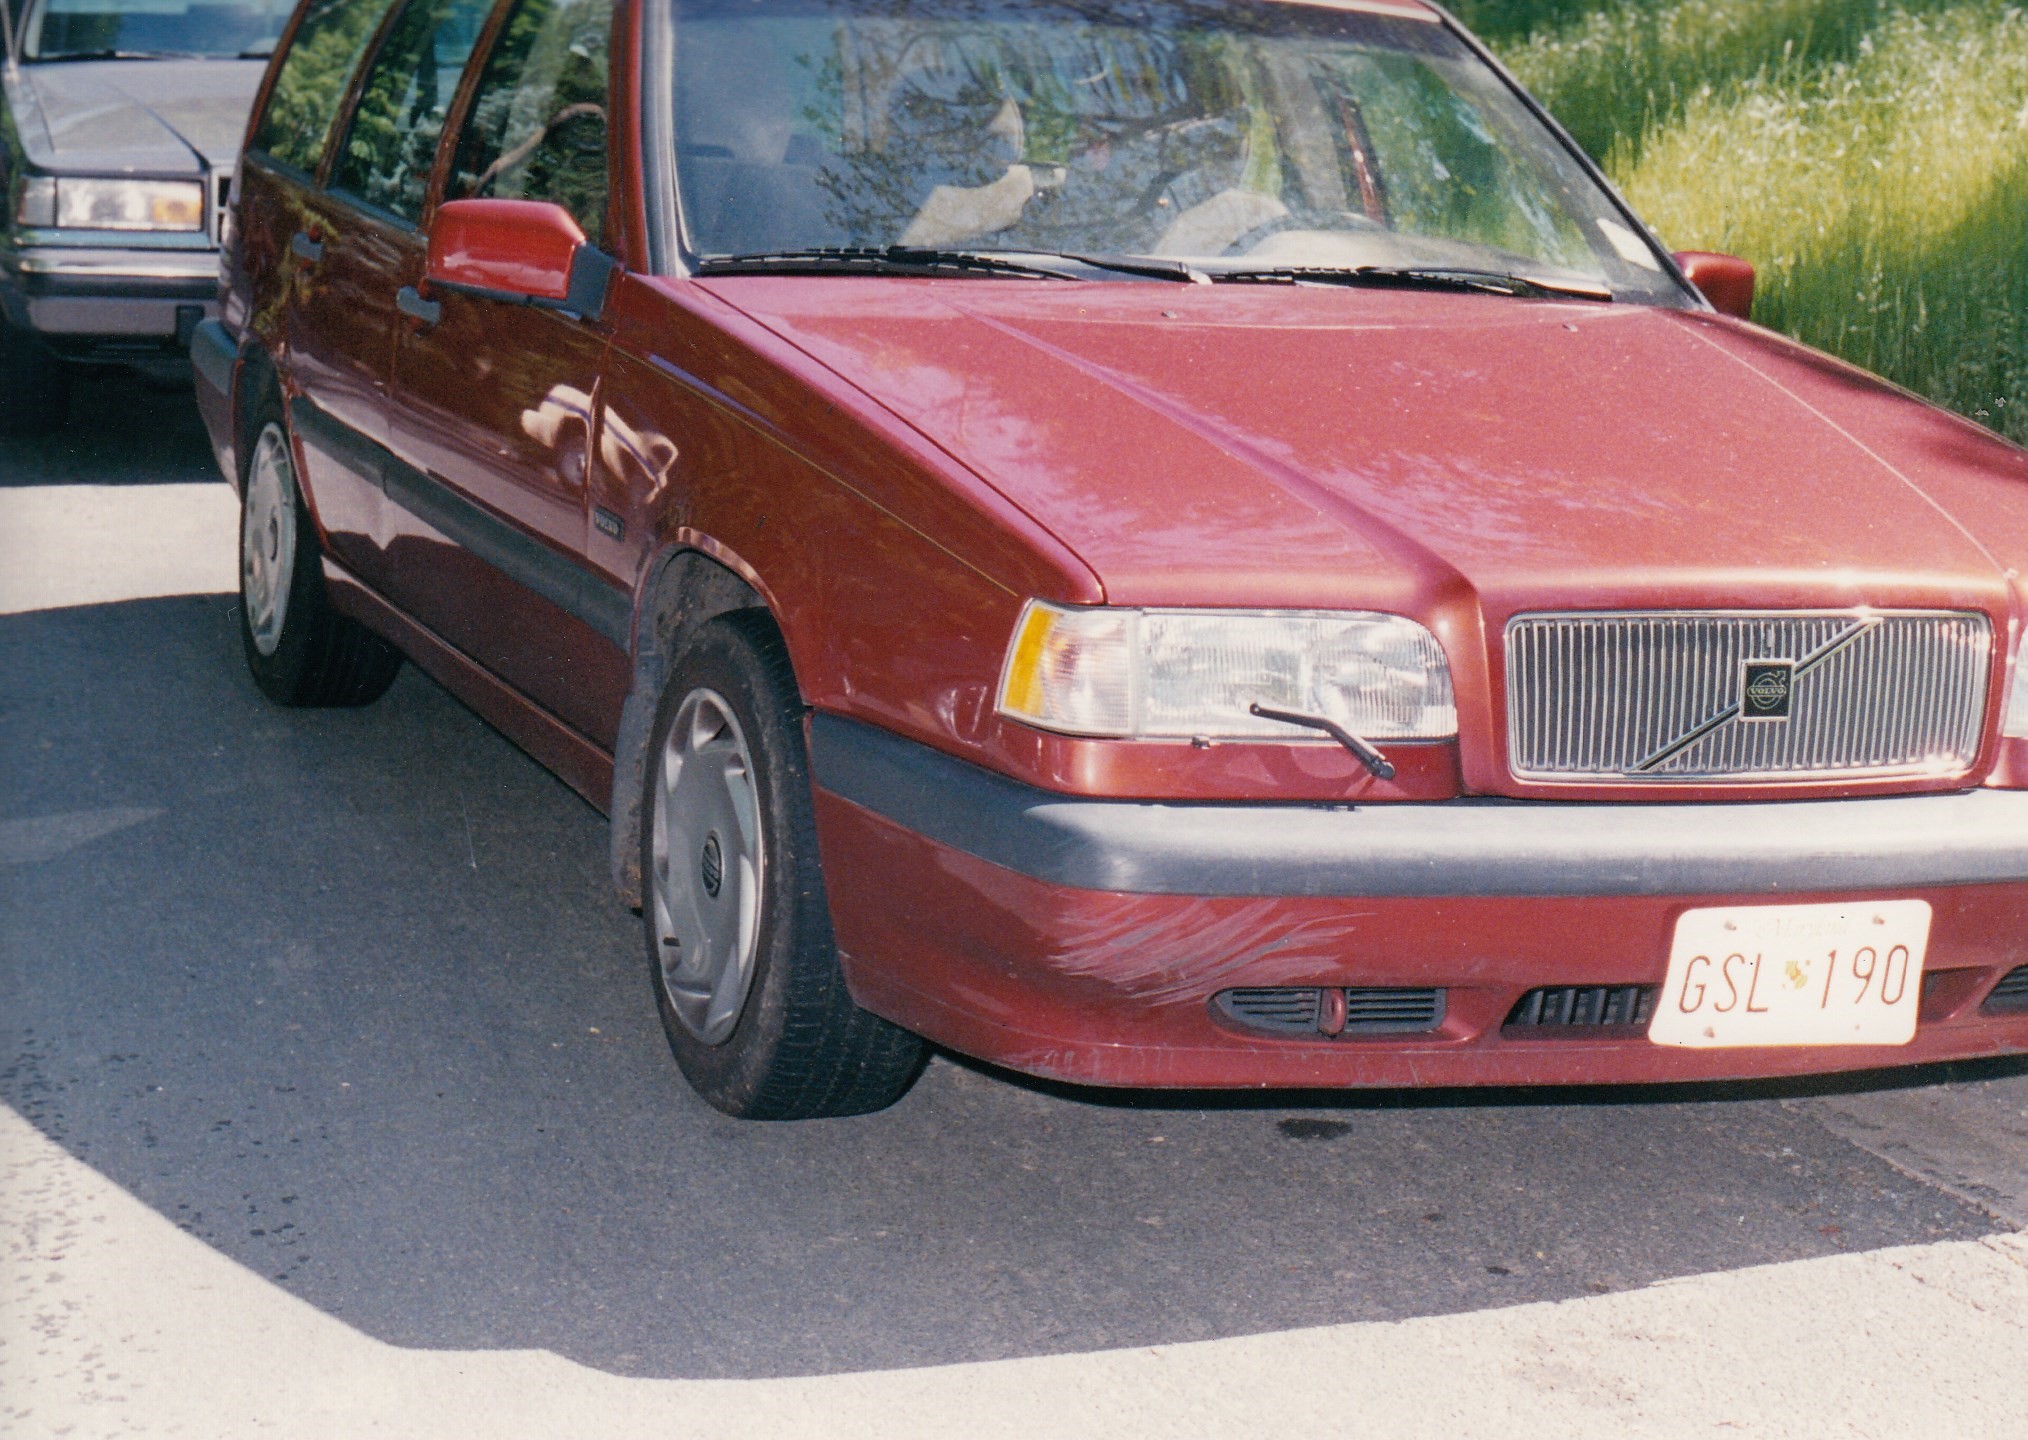 Alison Thresher's vehicle, a red Volvo station wagon, on the day it was recovered by officers - May, 25, 2000.